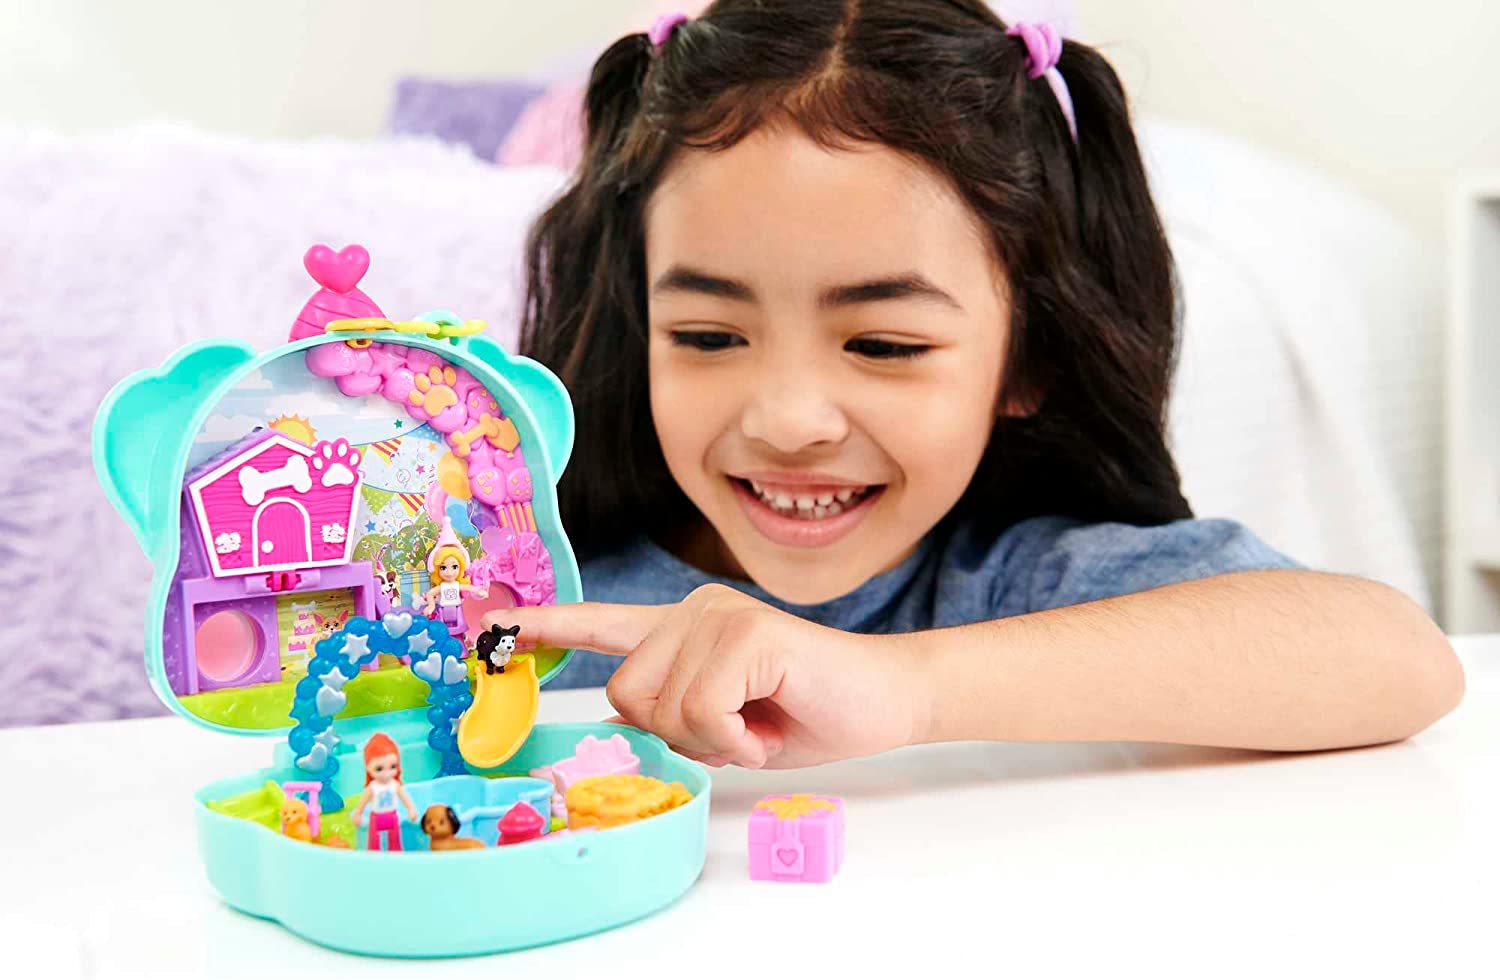 Polly Pocket Mini Toys, Doggy Birthday Bash Compact Playset with 2 Micro Dolls and 14 Accessories, Pocket World Travel Toys with Surprise Reveals